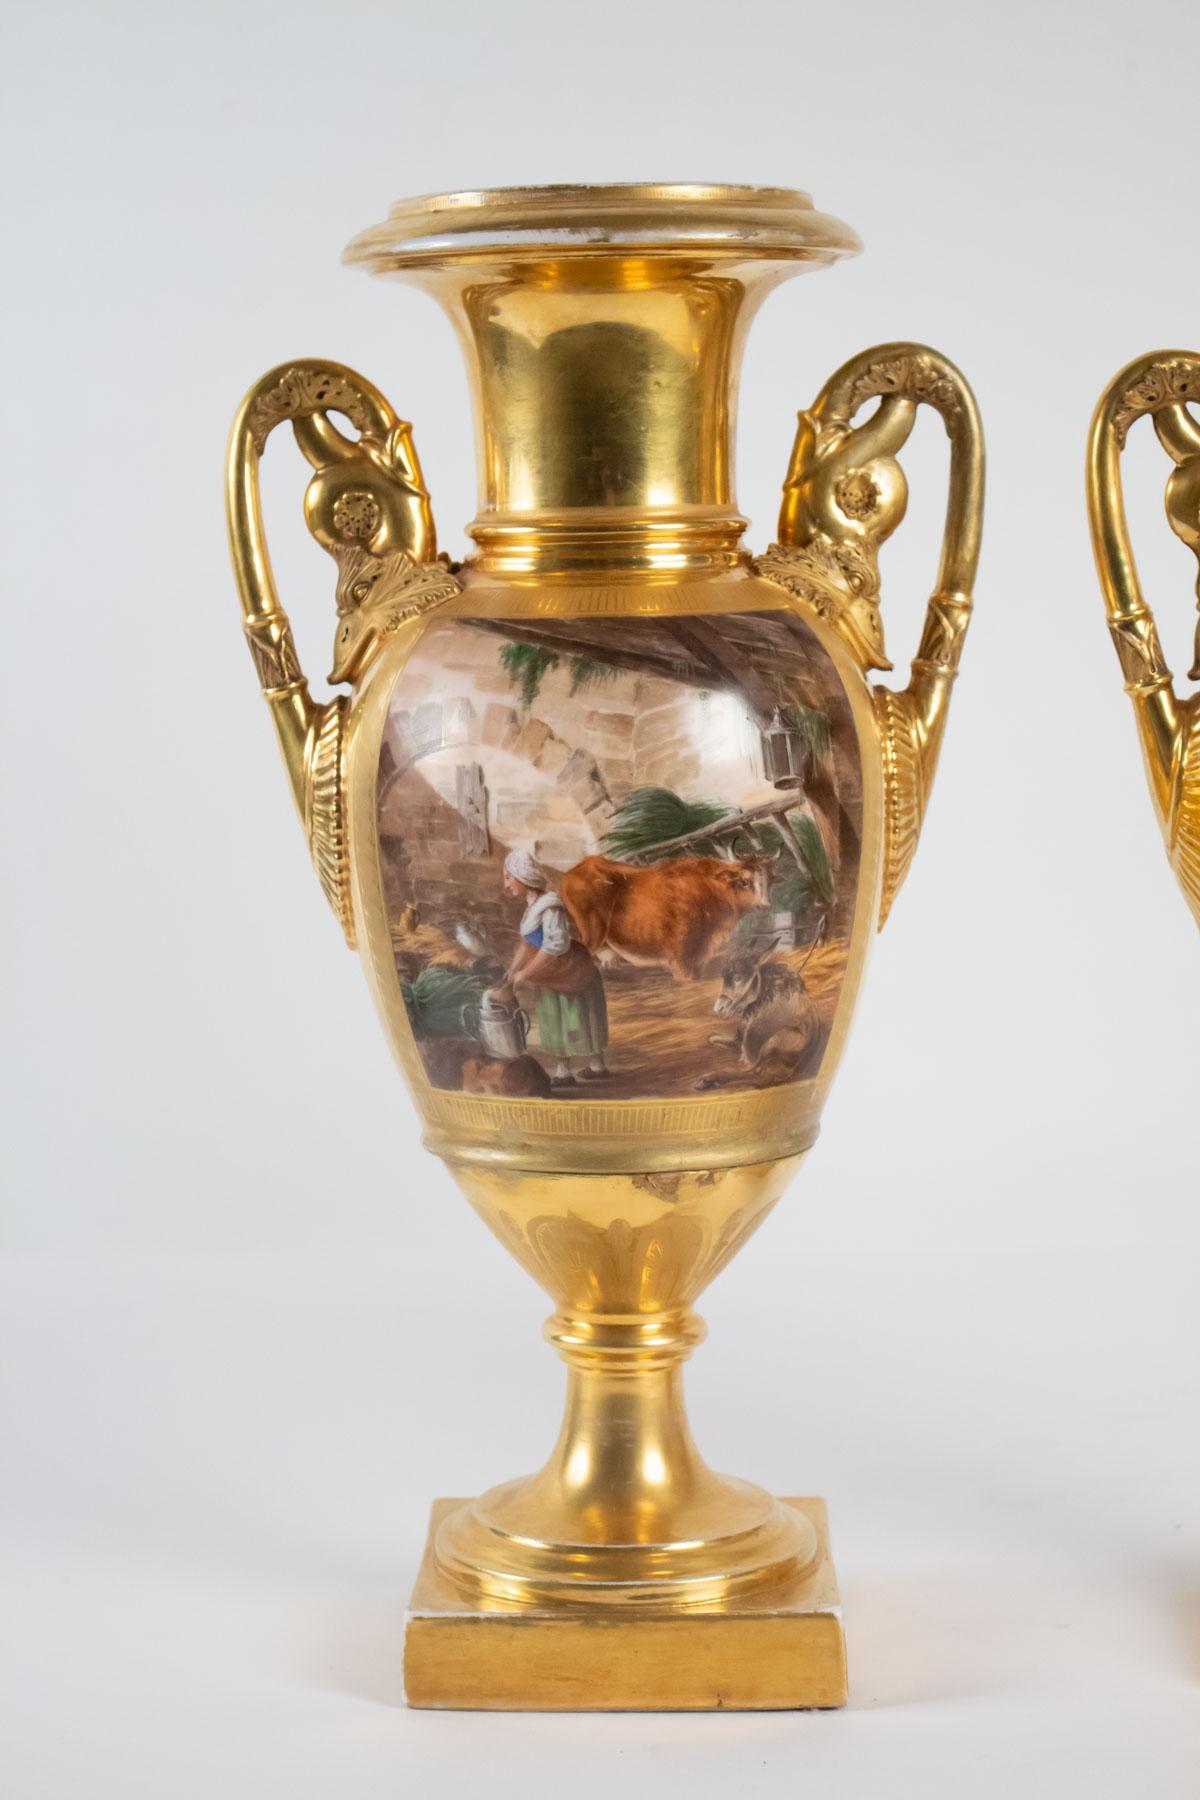 Pair of large vases, Empire Period
Porcelaine de Paris, pair of large spindle vases, gilded. Empire period.
Dimensions: 45 x 20 cm at the widest.